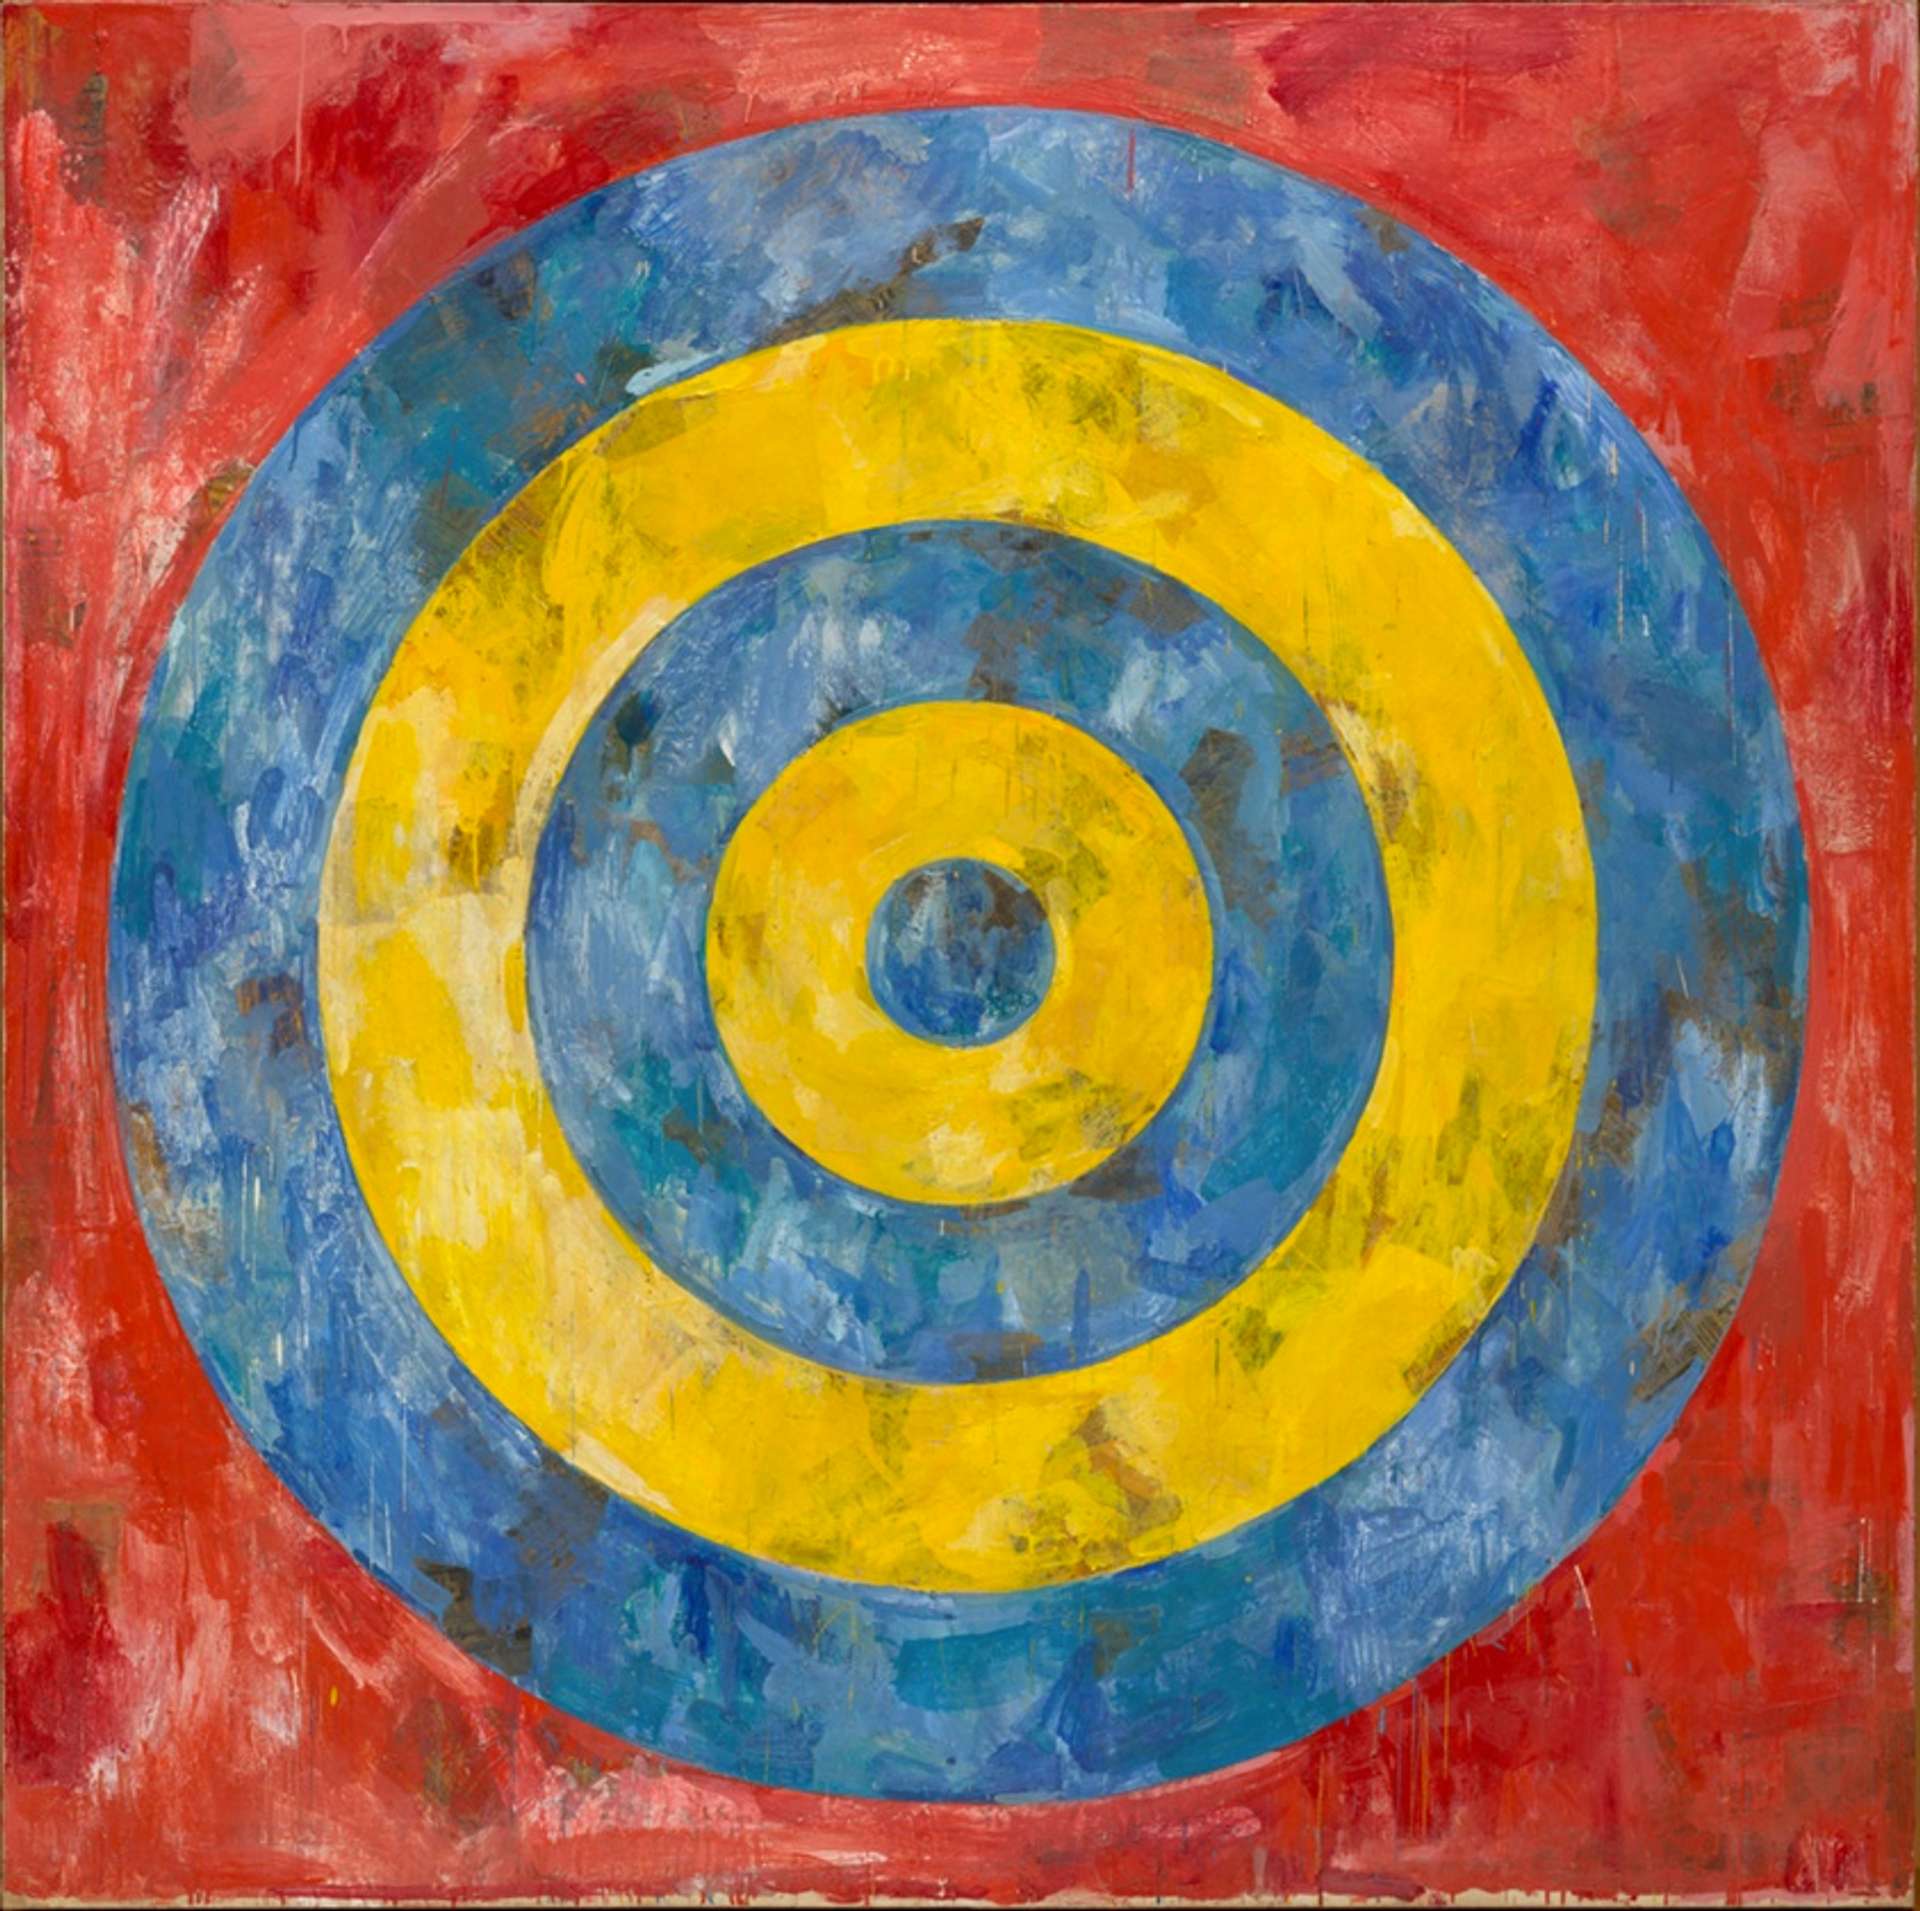 A yellow and blue target set against a red background.